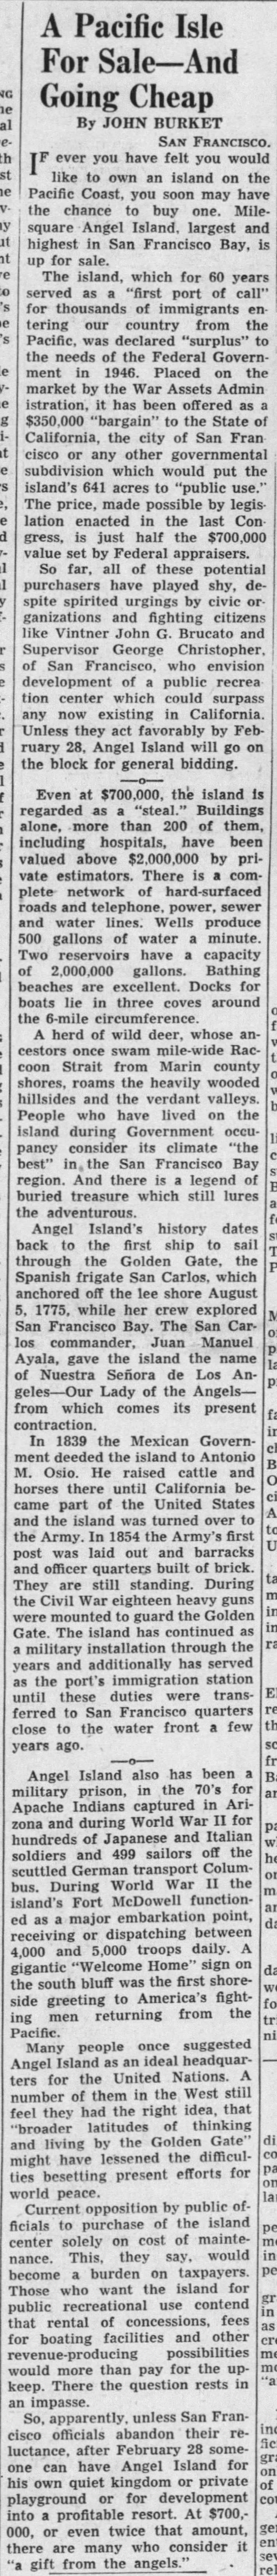 After immigration station closes, Angel Island goes up for sale, 1949